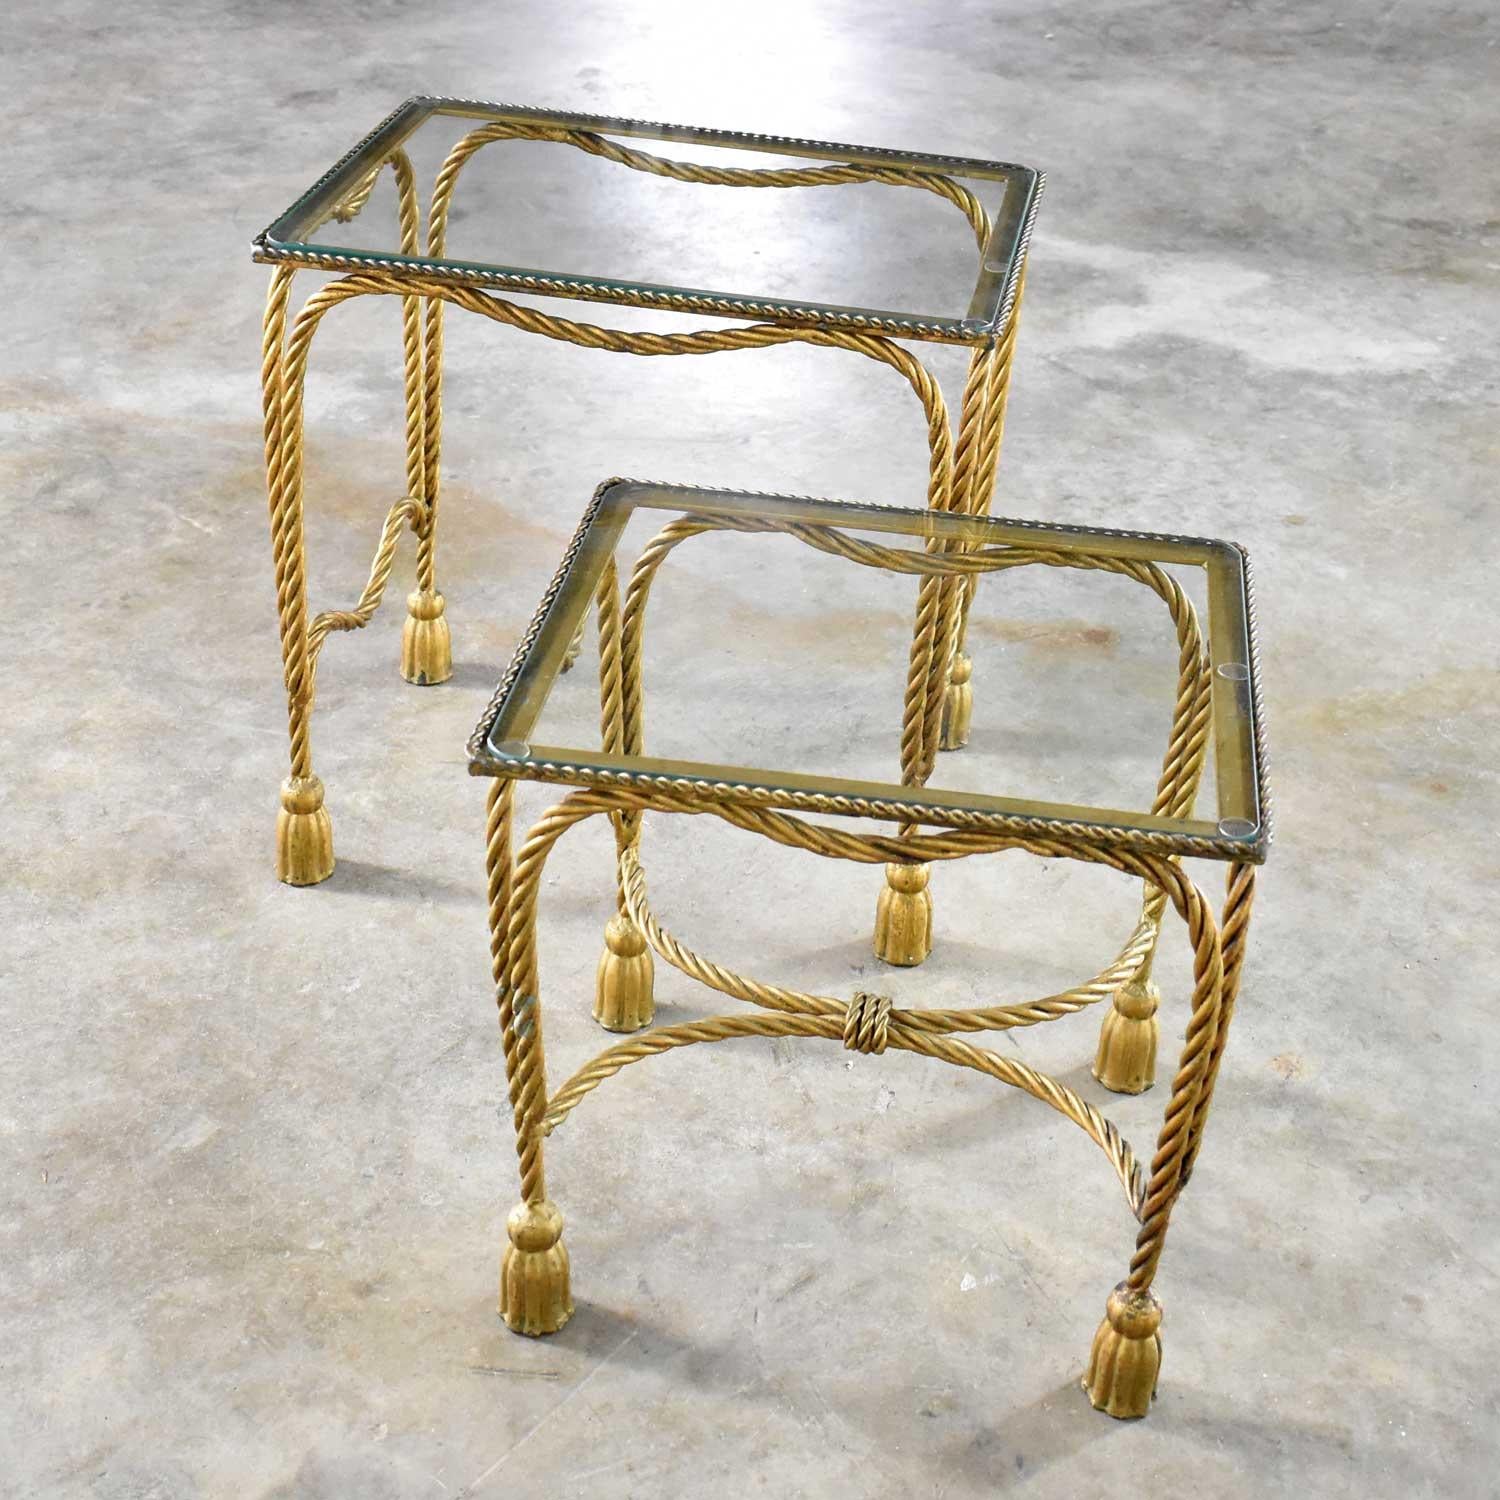 20th Century Set of Two Hollywood Regency Gilt Rope and Tassel Nesting Tables with Glass Tops